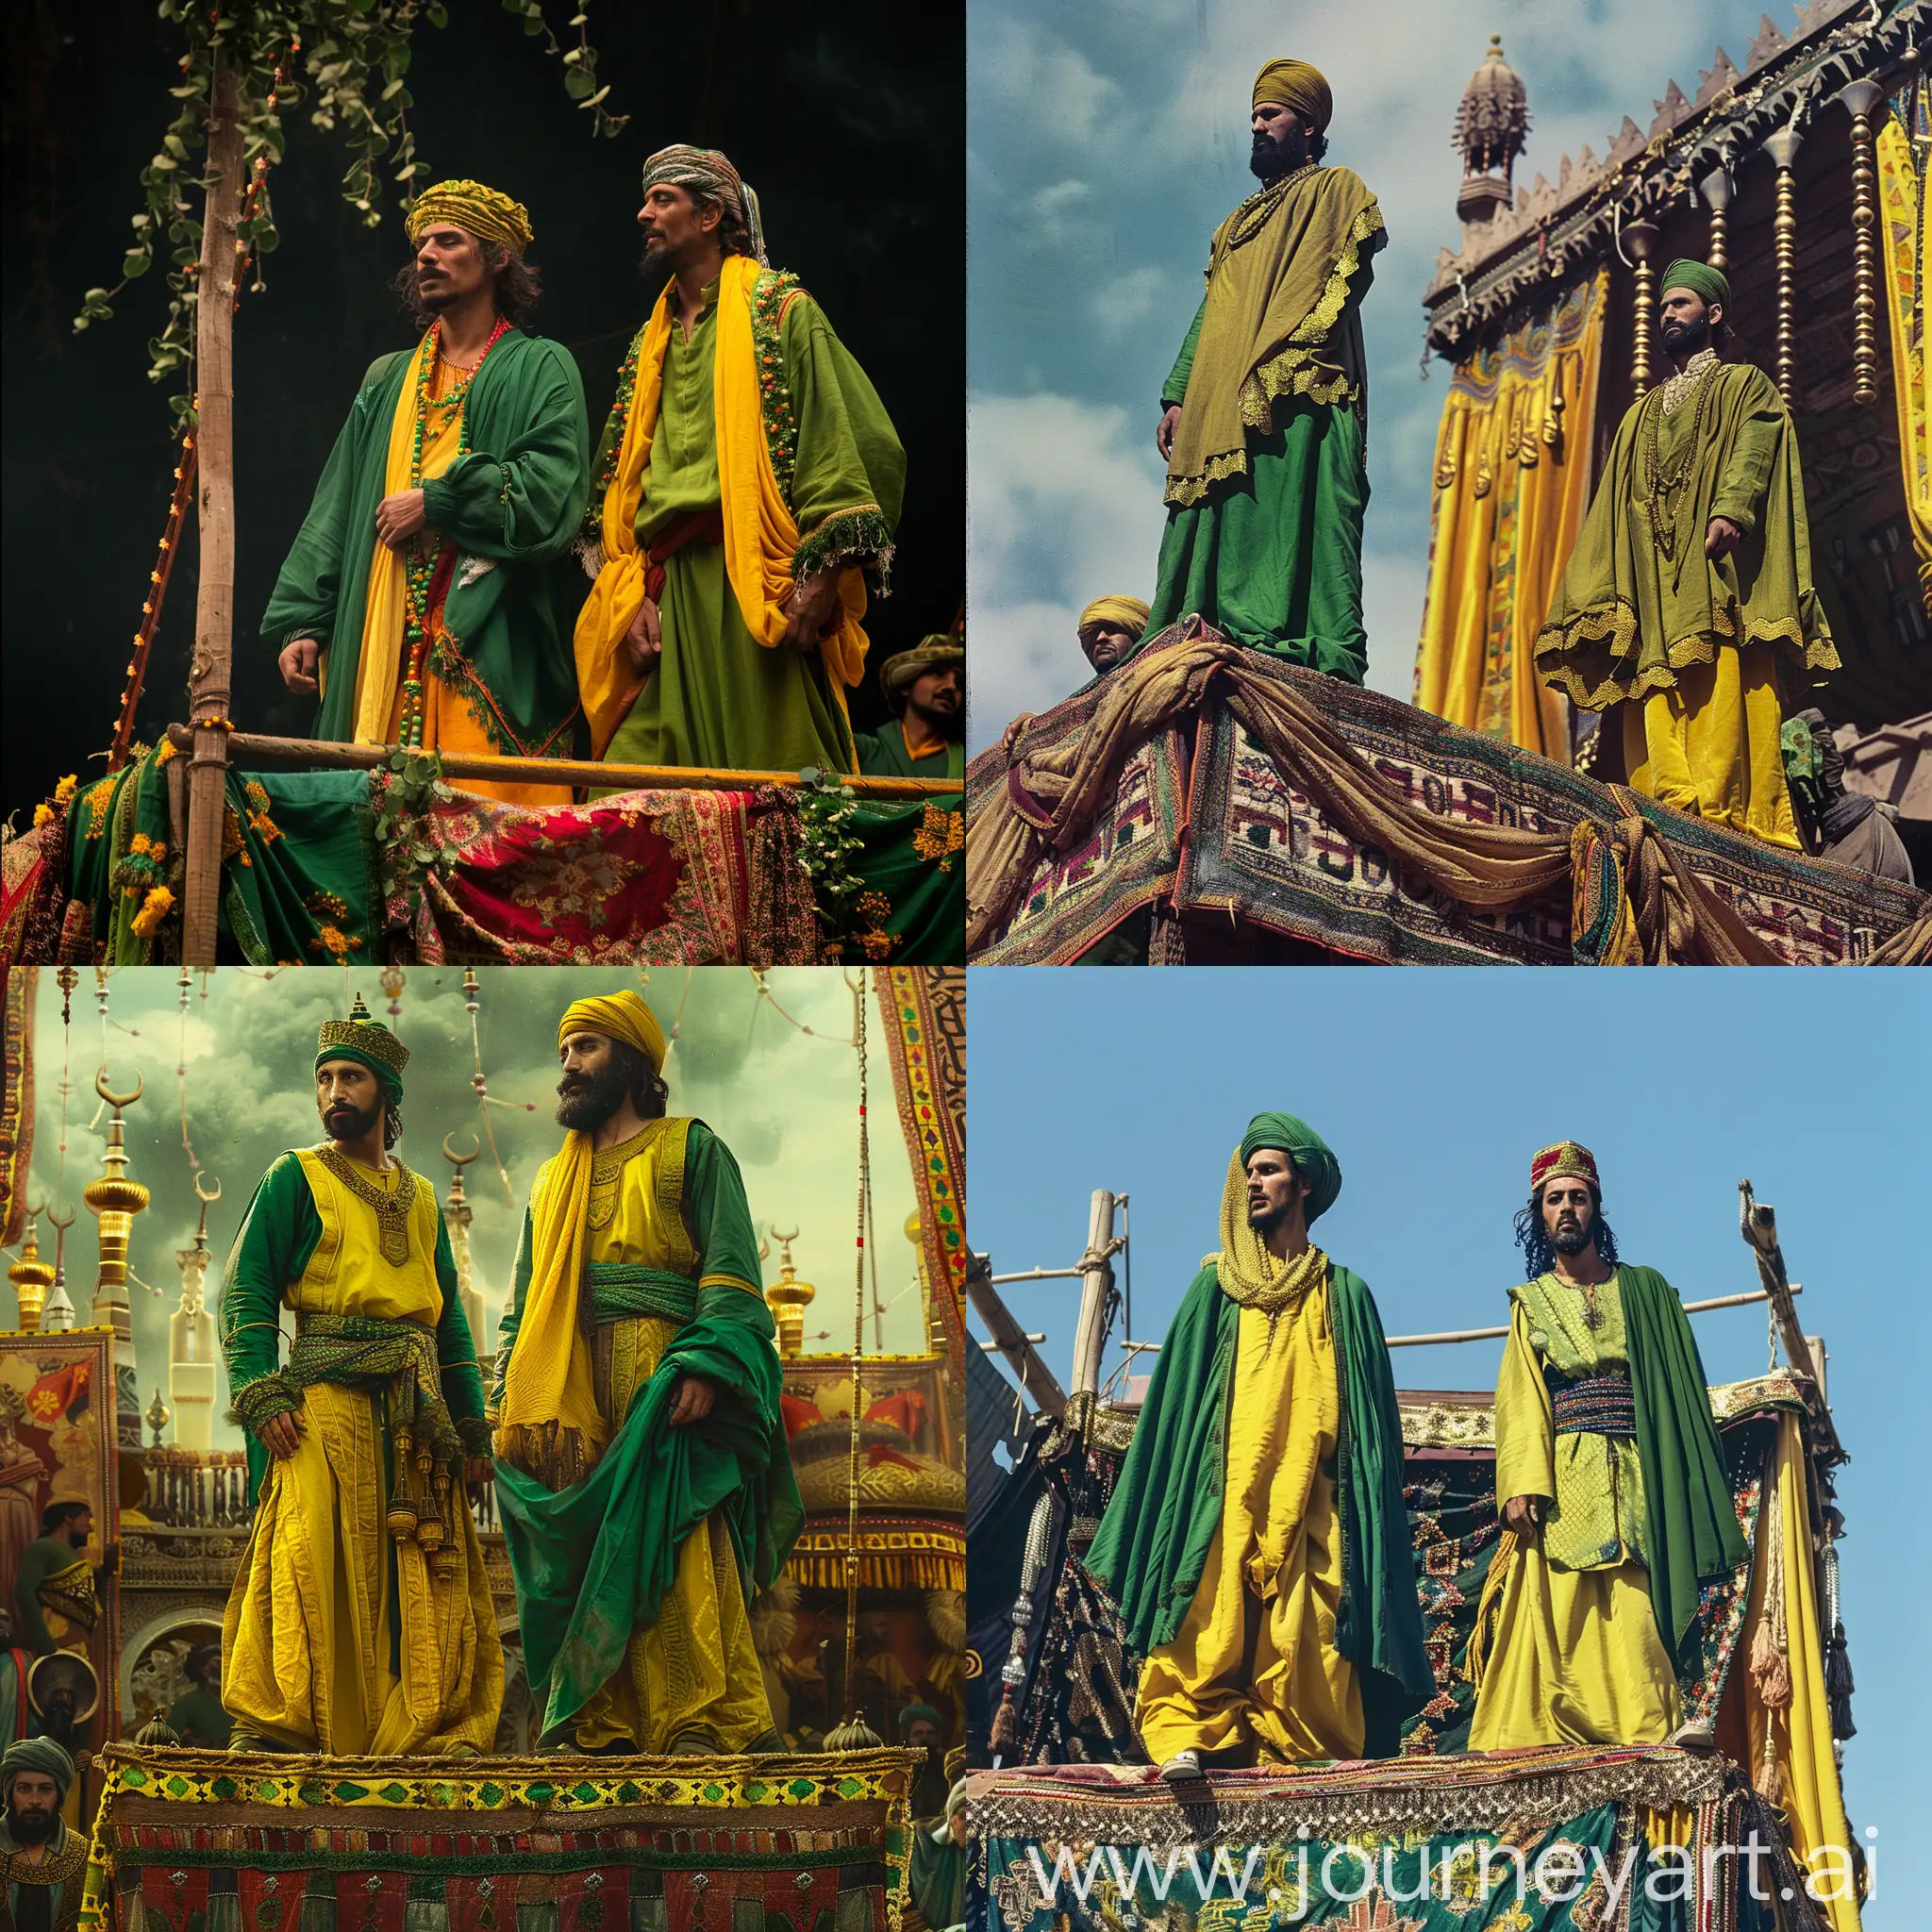 Vibrant-Ghadir-Khumm-Celebration-with-Two-Men-in-Green-and-Yellow-Robes